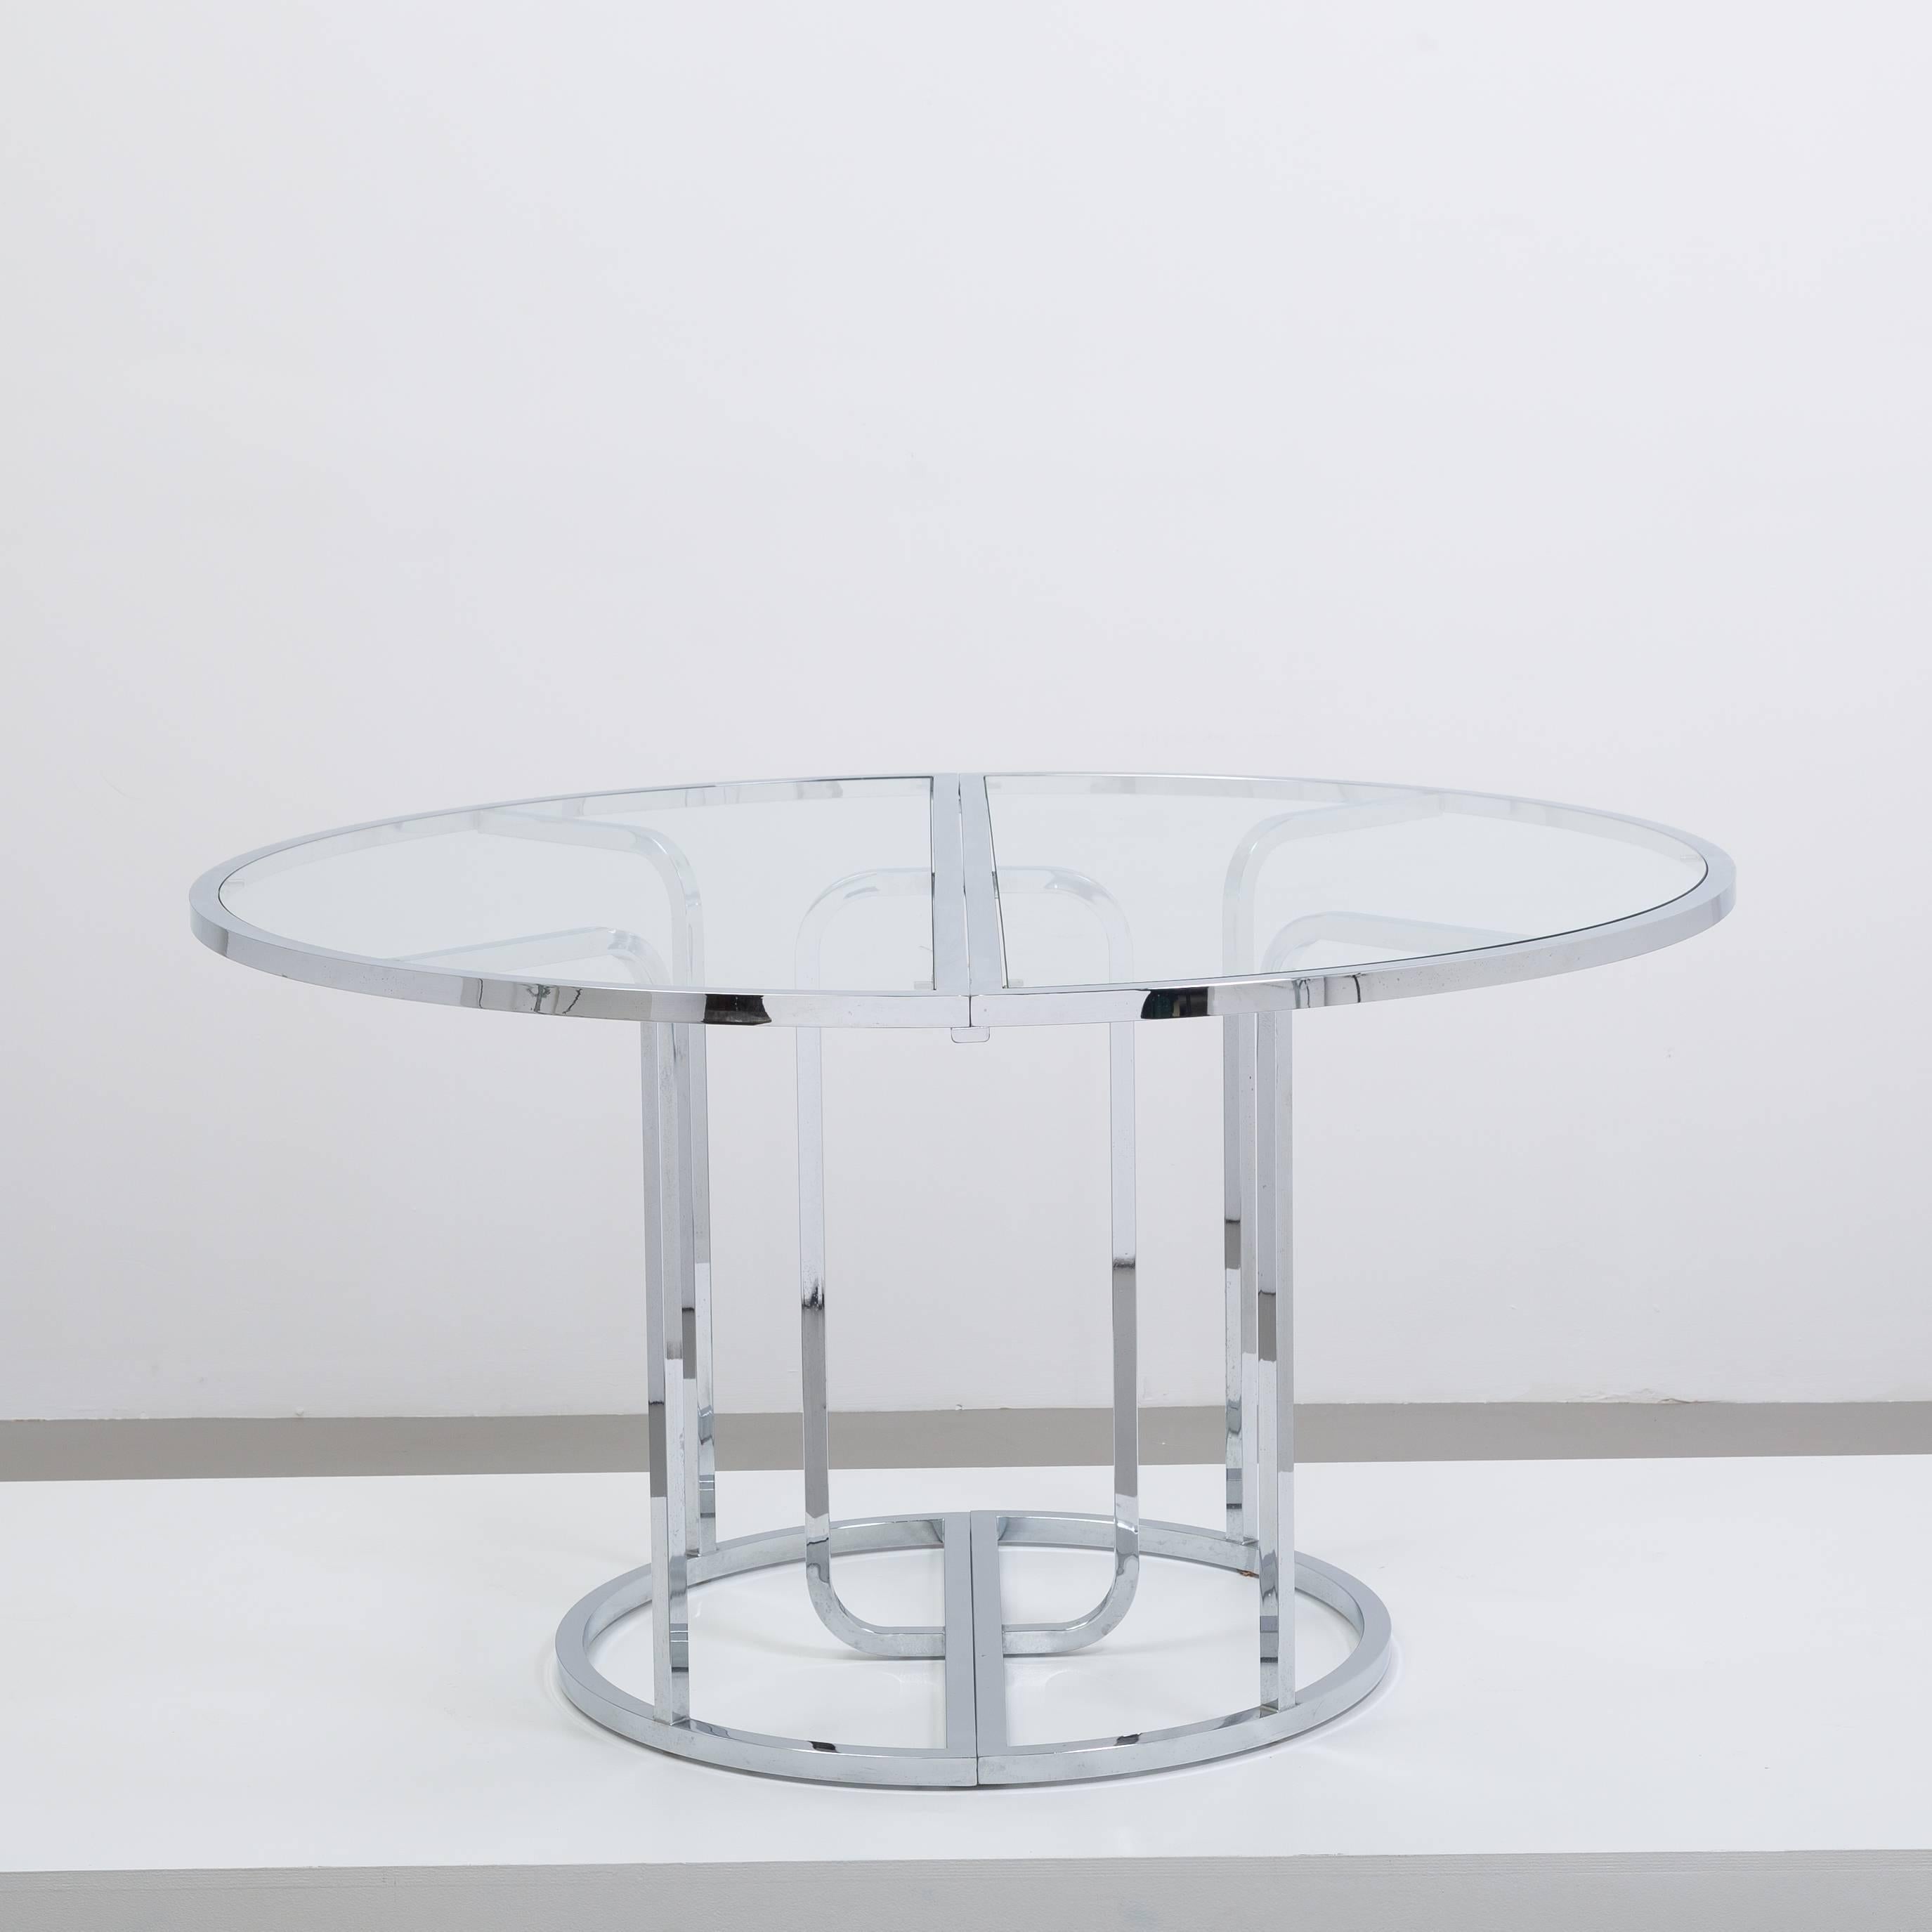 Late 20th Century Three-Part Chromium Steel Framed Glass Dining Table, 1970s For Sale